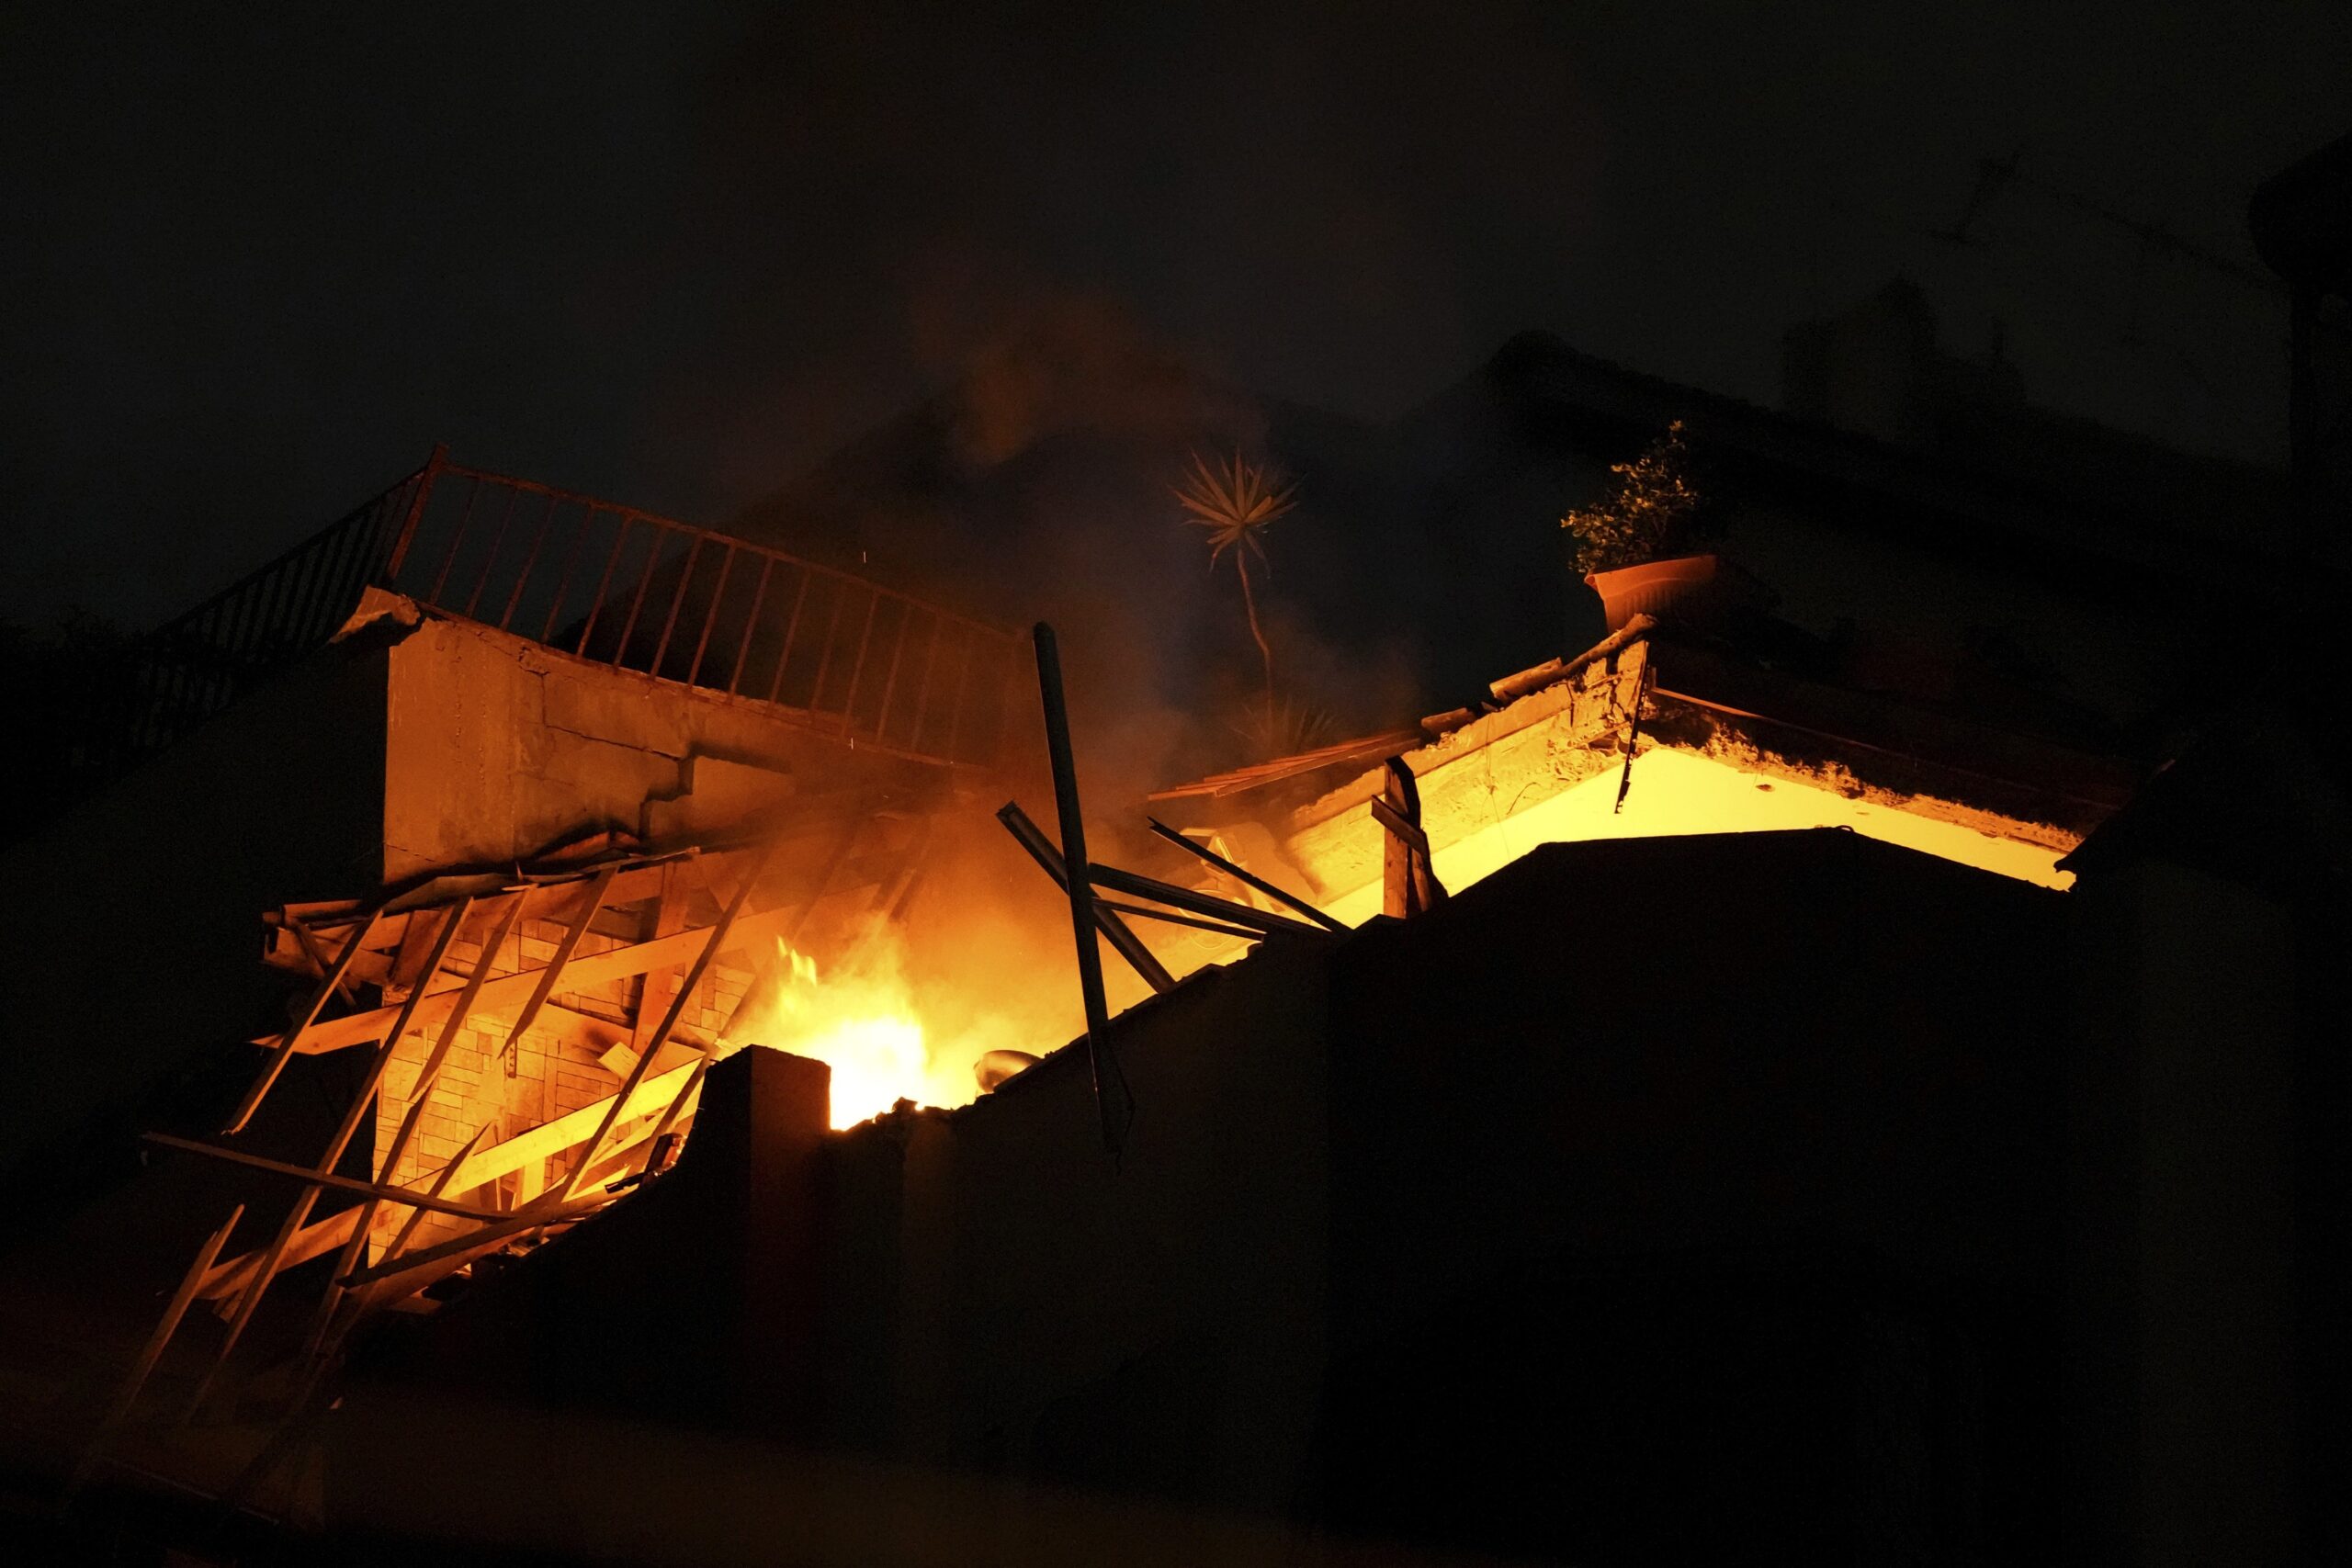 Inferno Tragedy: Seven Infants Perish in Hospital Fire Catastrophe